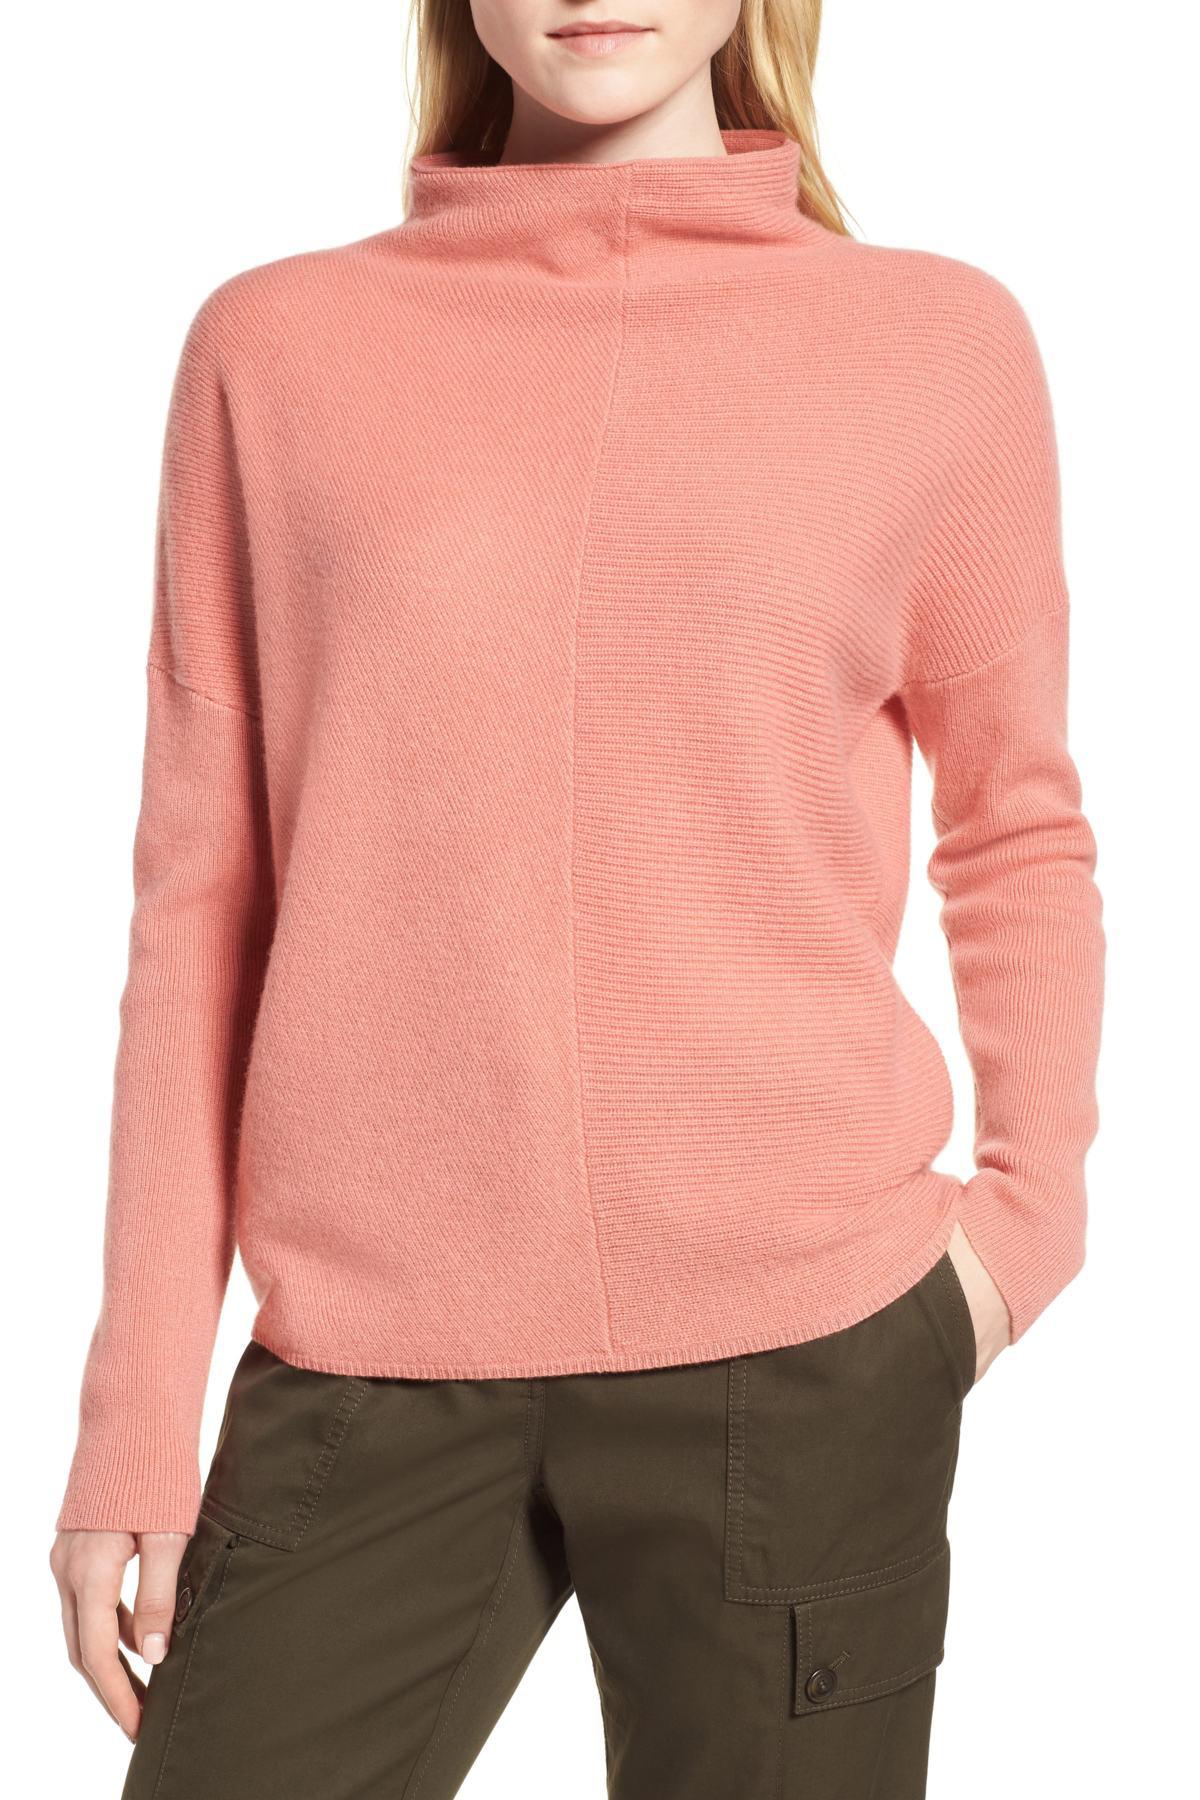 Download Nordstrom Cashmere Directional Rib Mock Neck Sweater in ...